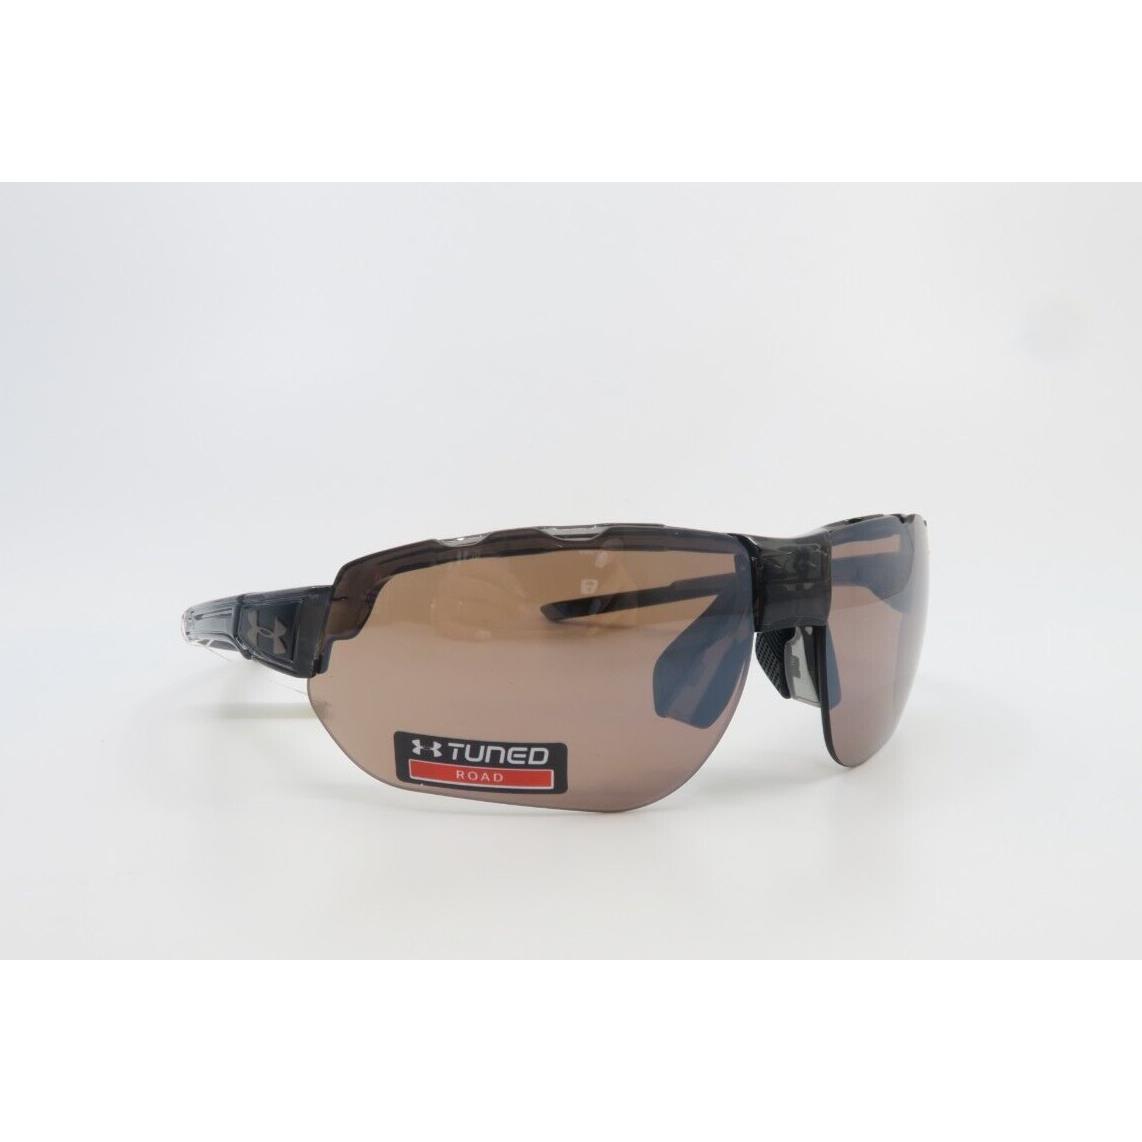 Under Armour sunglasses Tuned Road - Grey Frame, Smoke Brown Lens 1